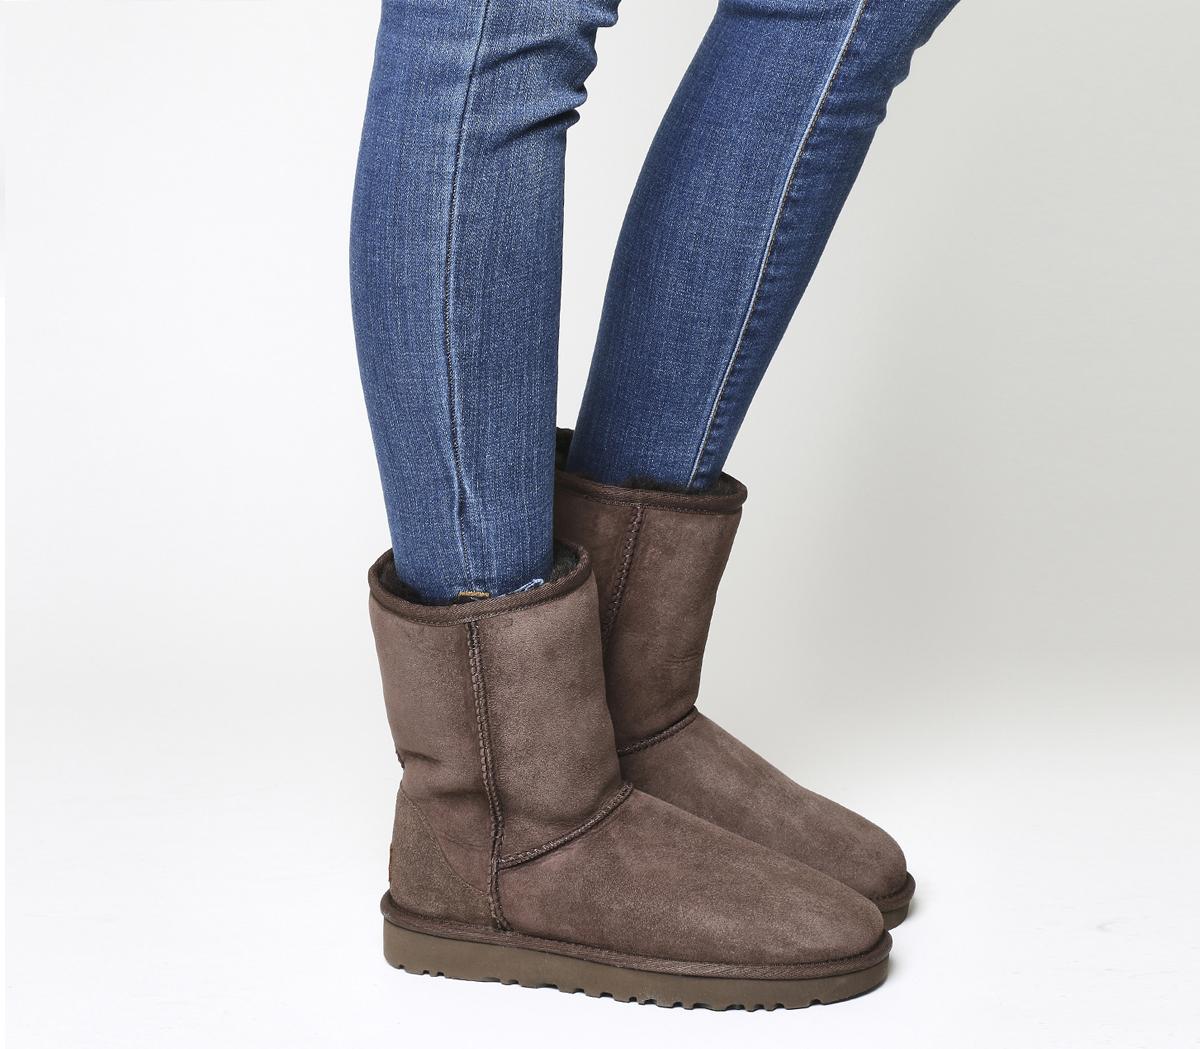 UGG Classic Short II Boots Chocolate Suede - Ankle Boots